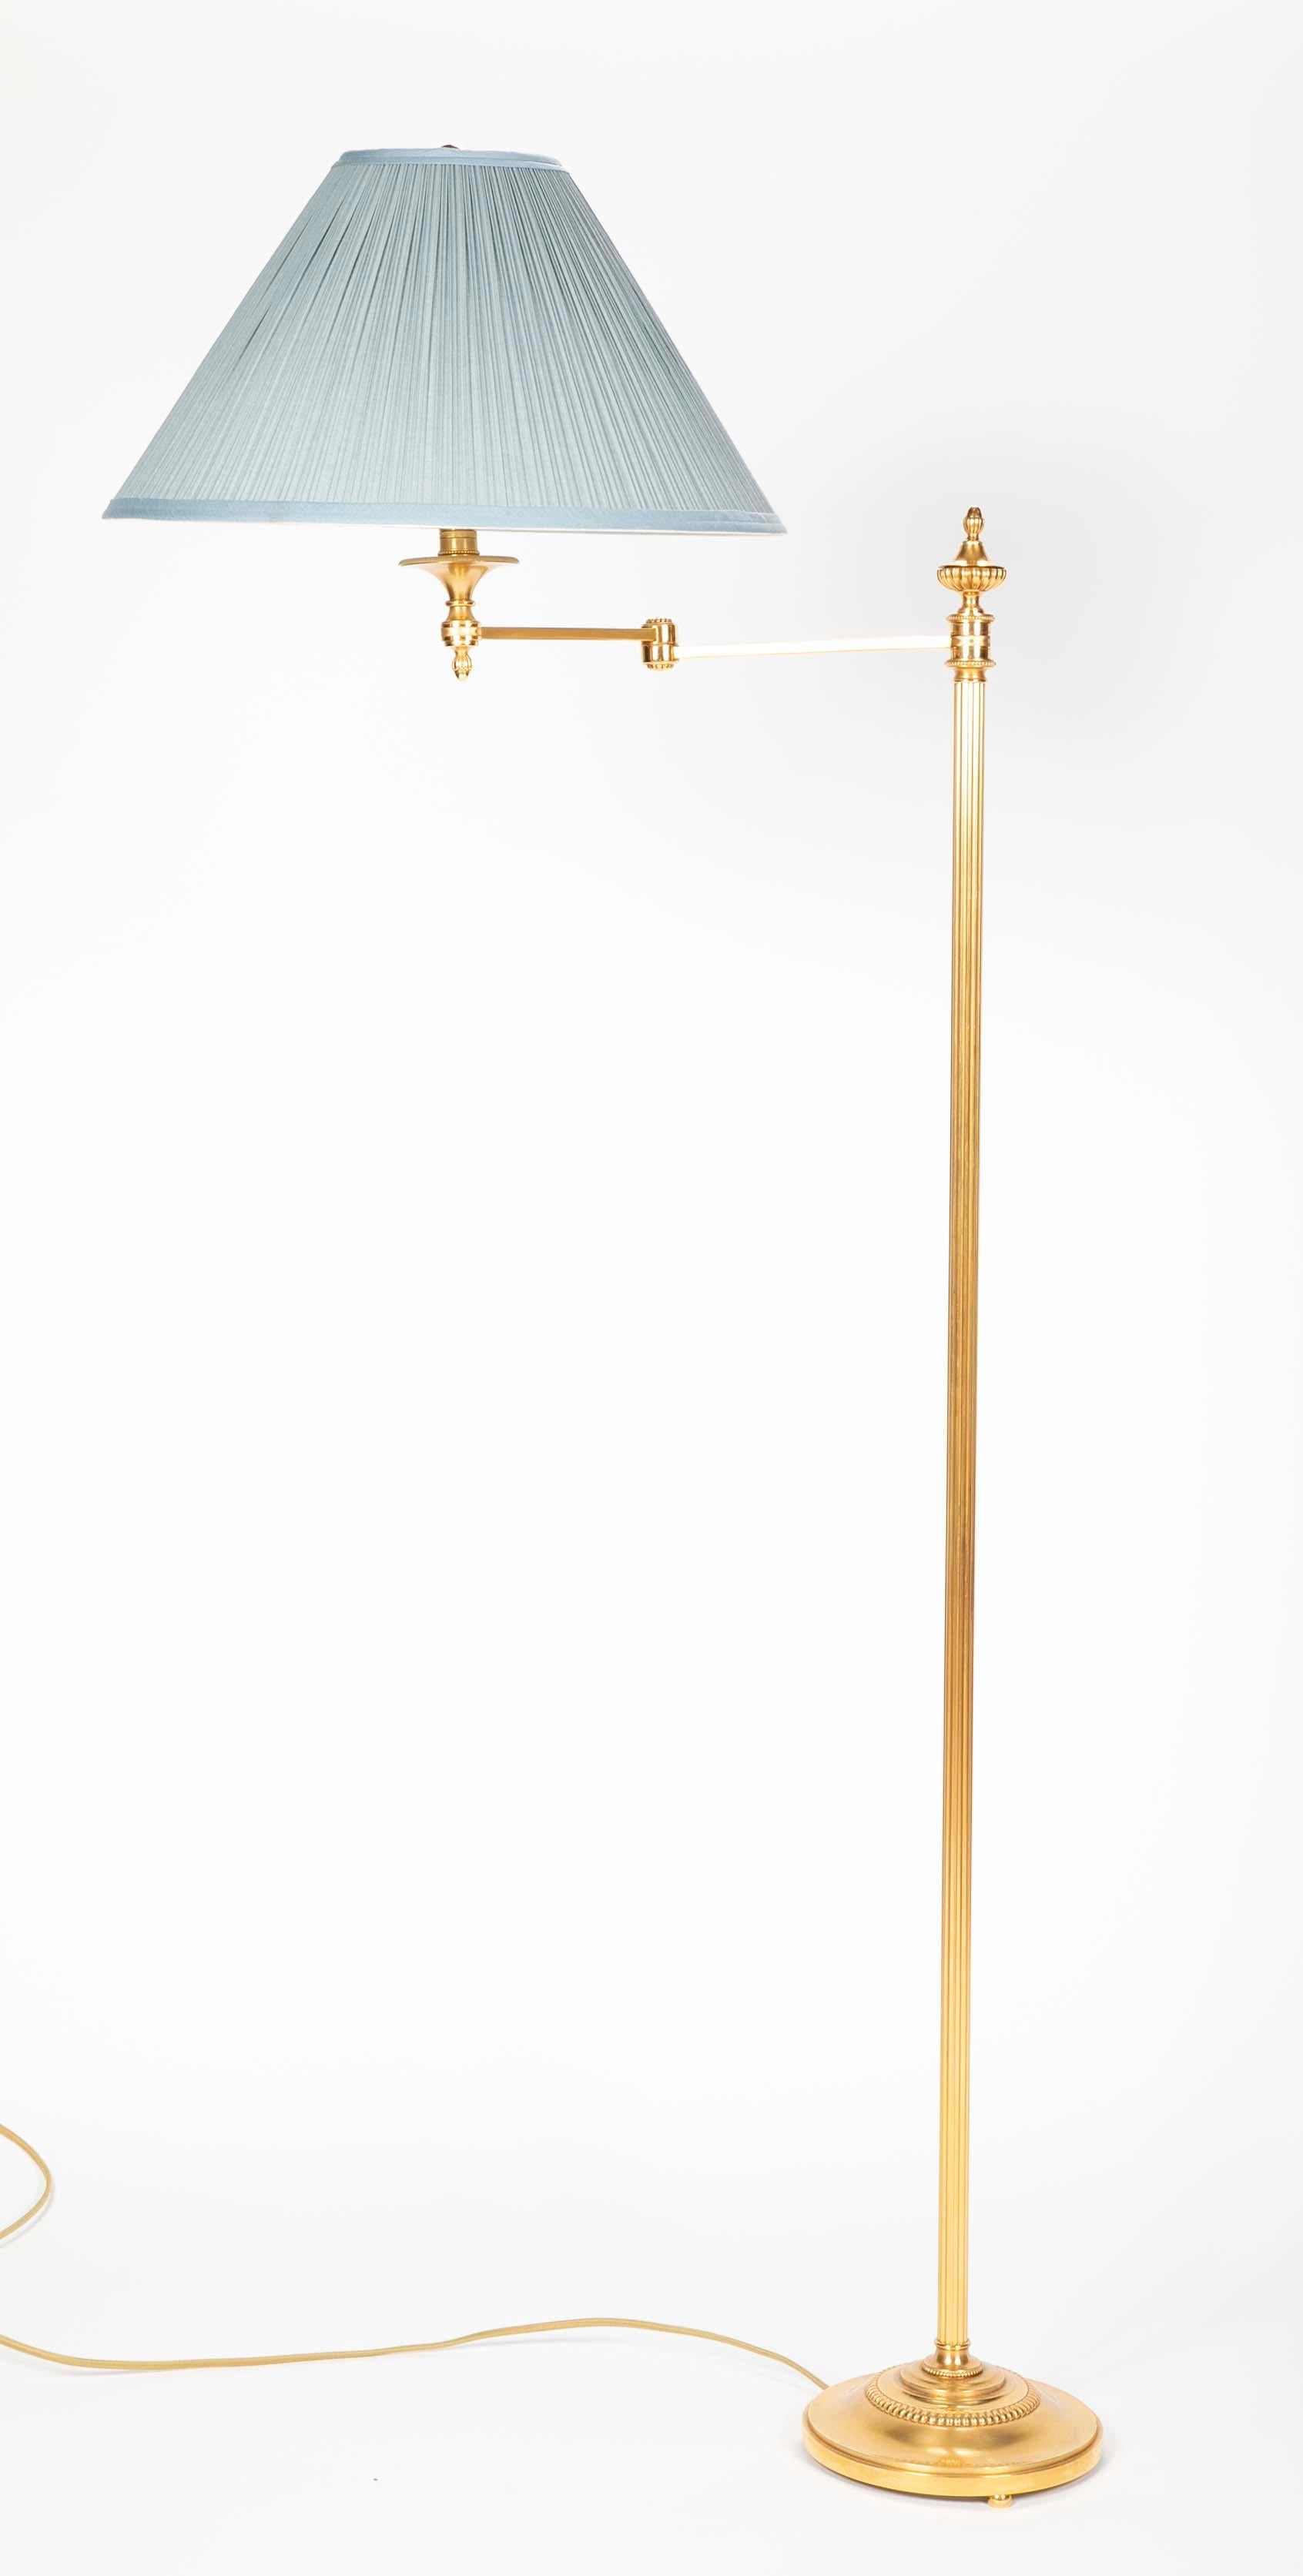 A  gilt bronze, swing-arm floor lamps by Maison Meilleur, France.   Only one floor lamp available.   